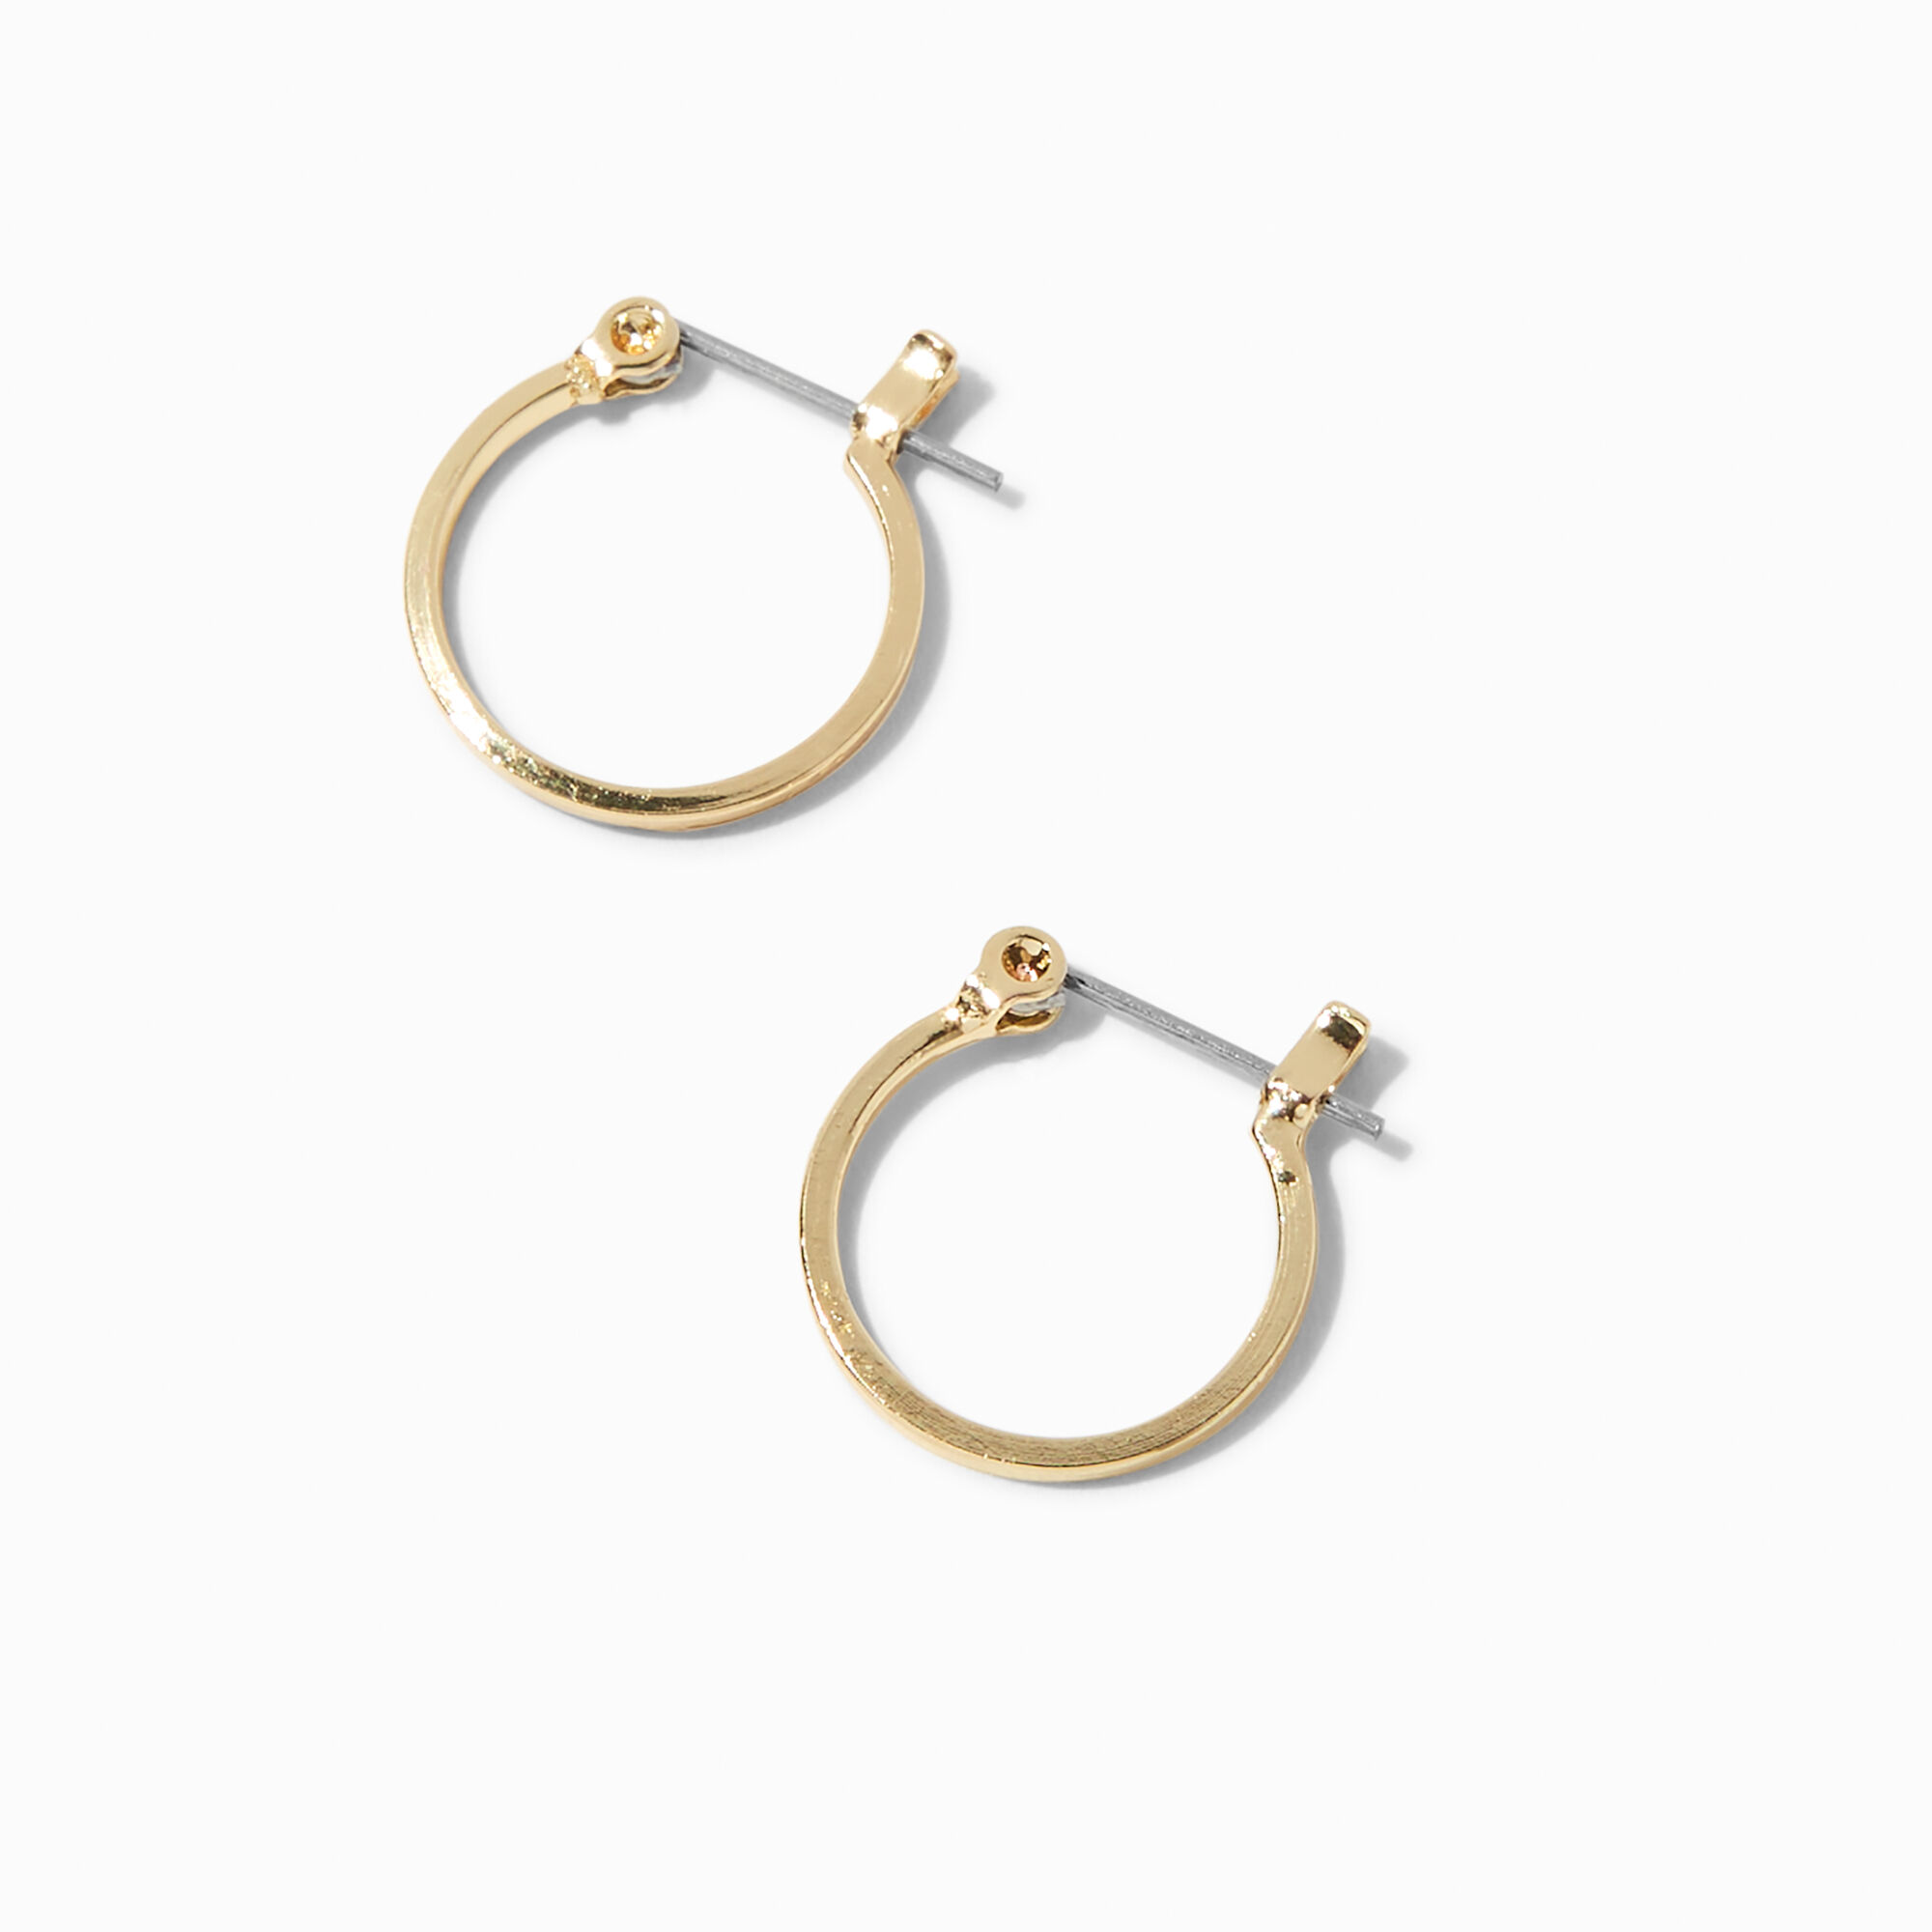 View Claires 15MM Hoop Earrings Gold information